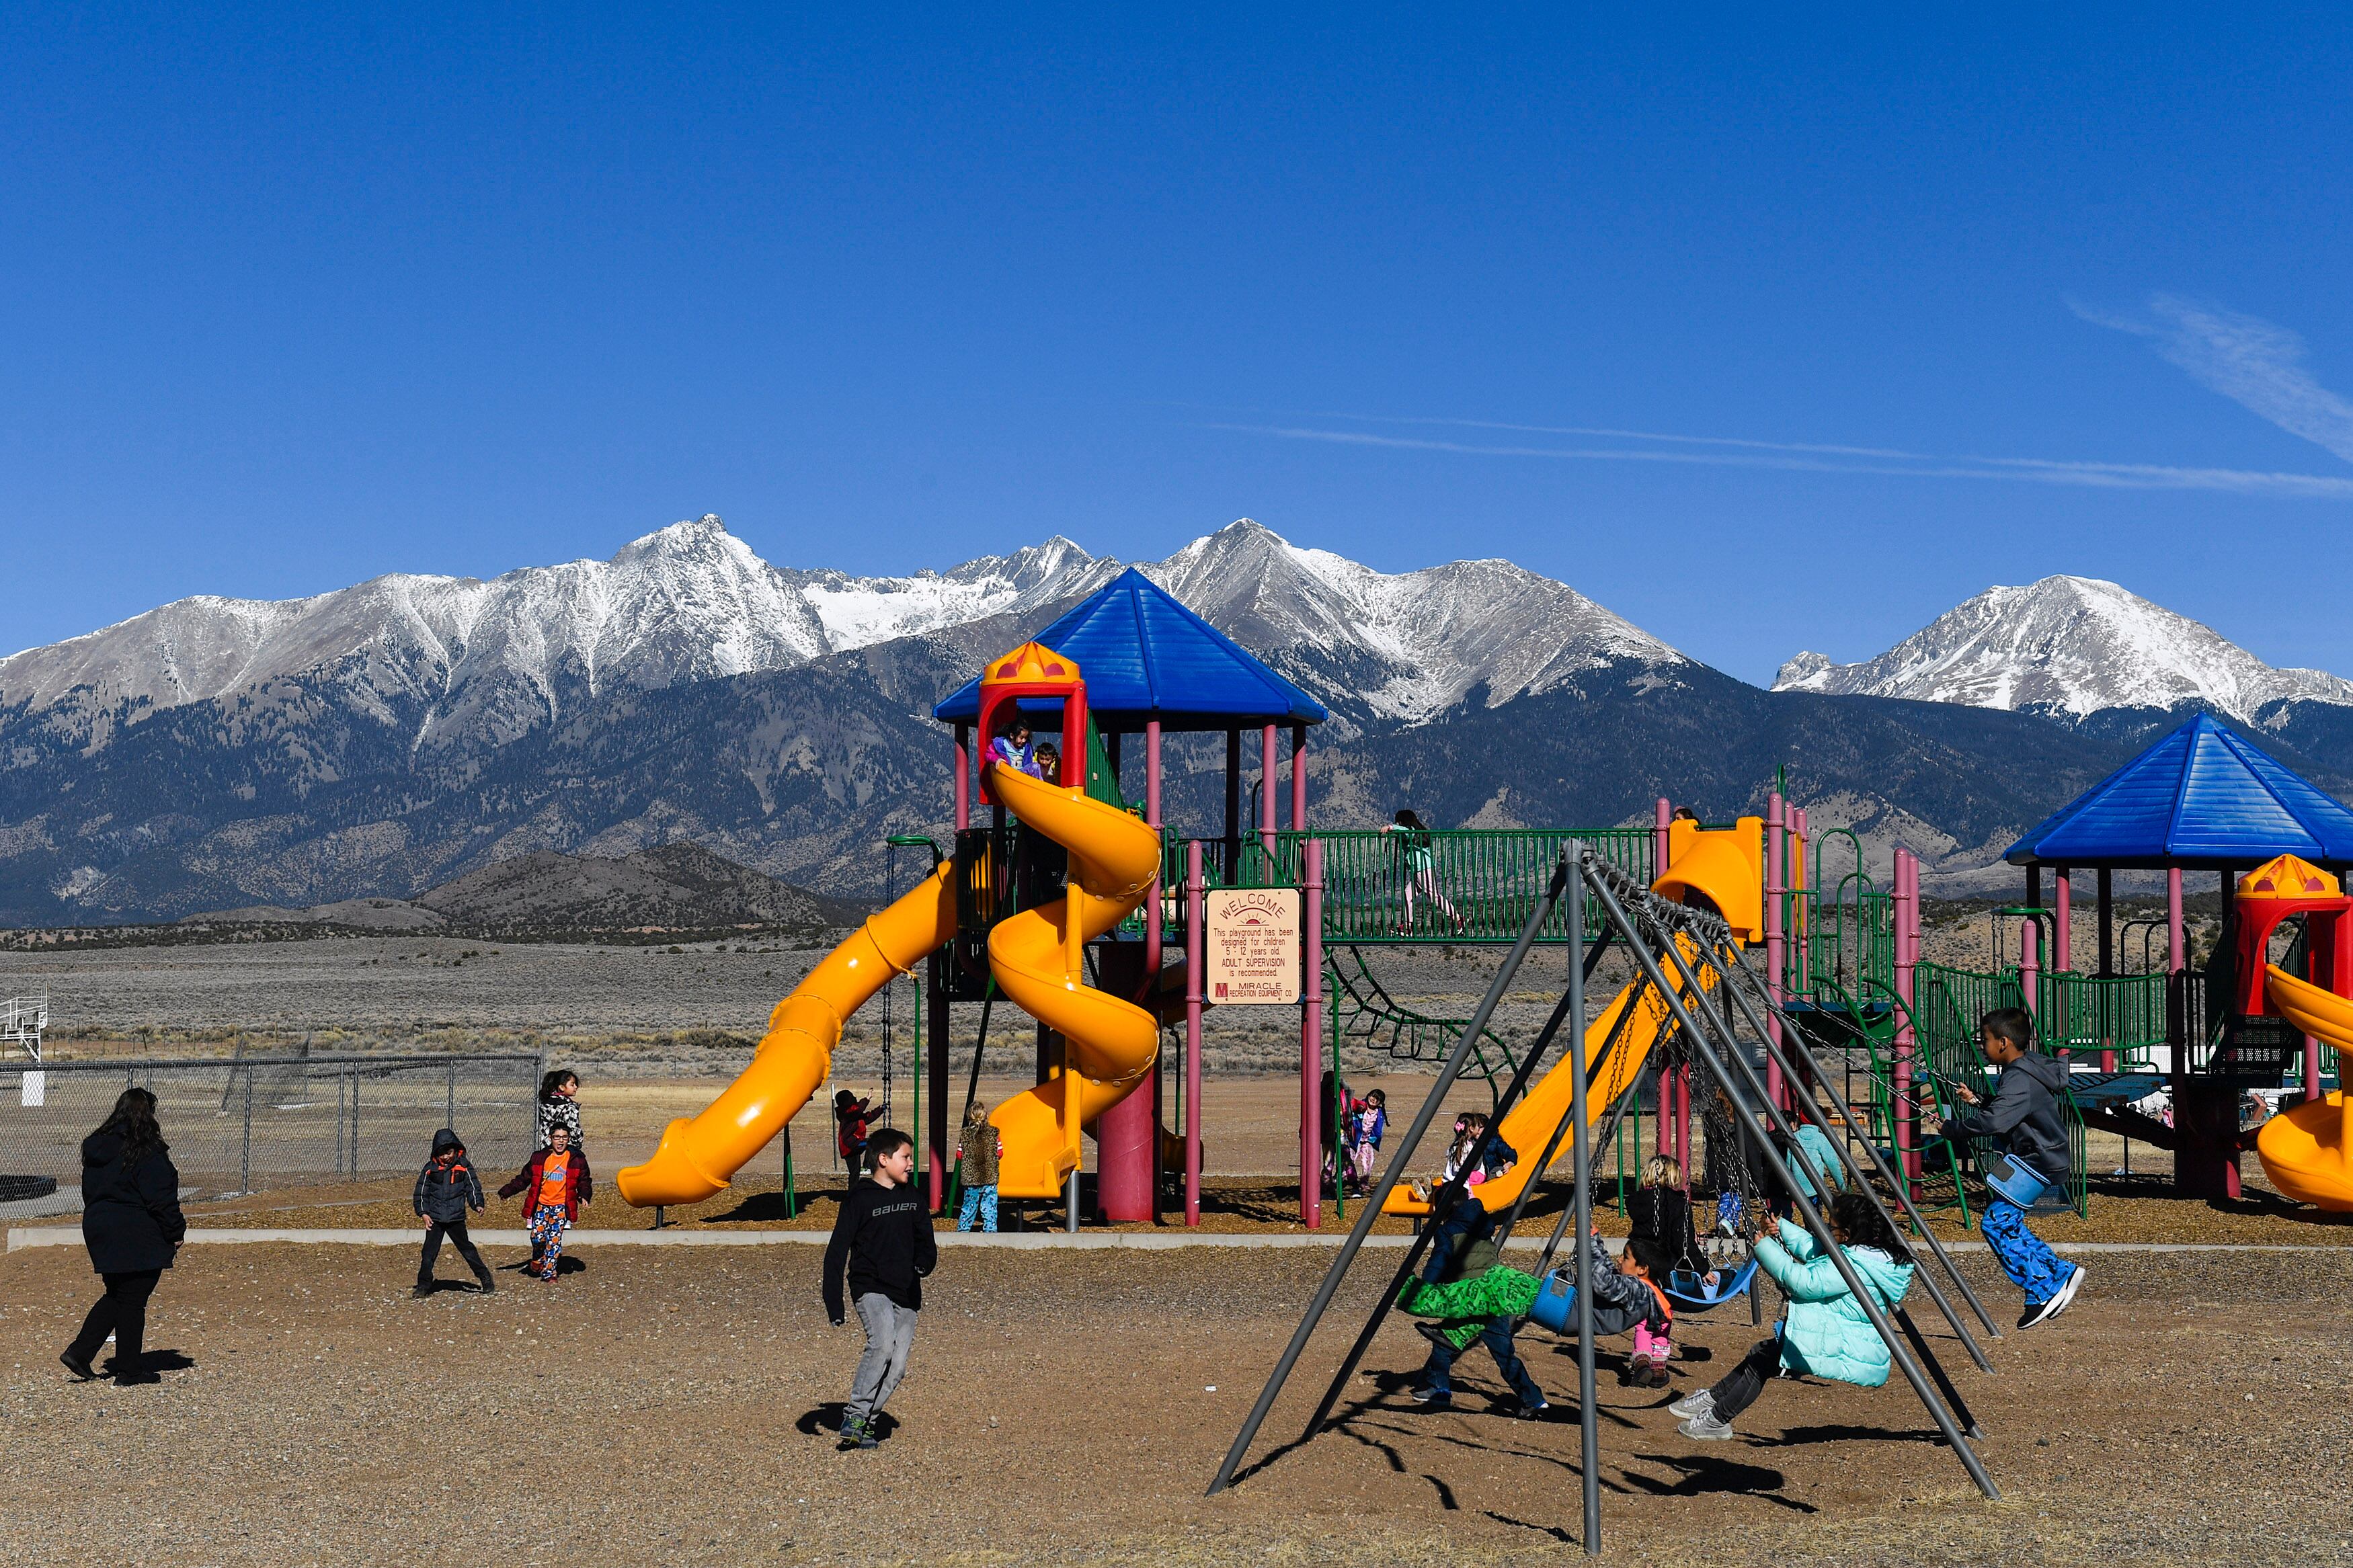 Young students play on a colorful playground with large mountains and a blue sky in the background.